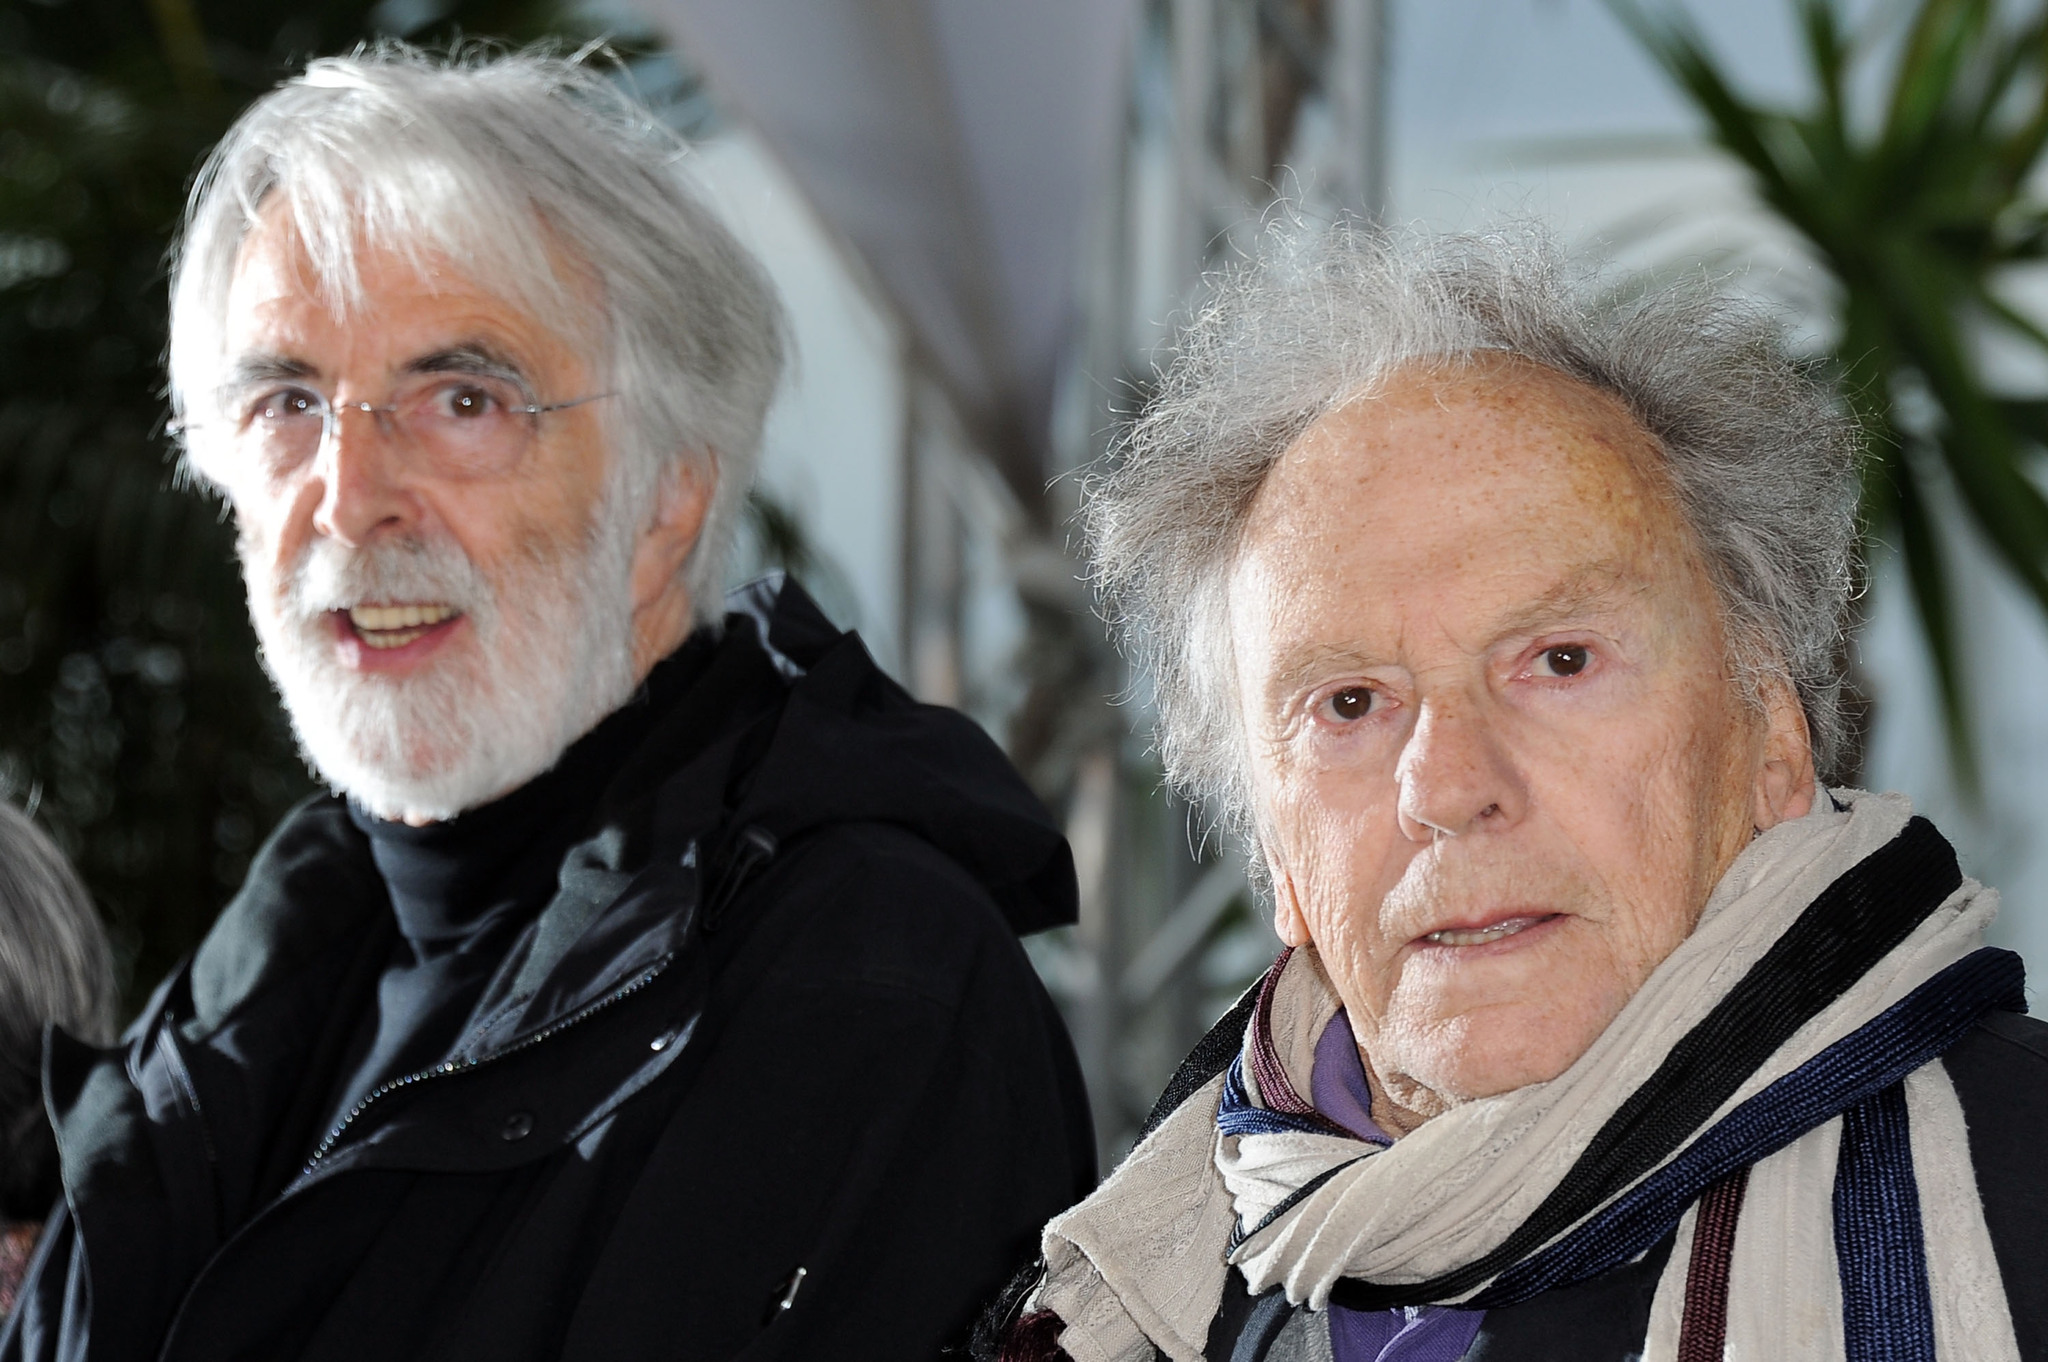 Jean-Louis Trintignant and Michael Haneke at event of Amour (2012)